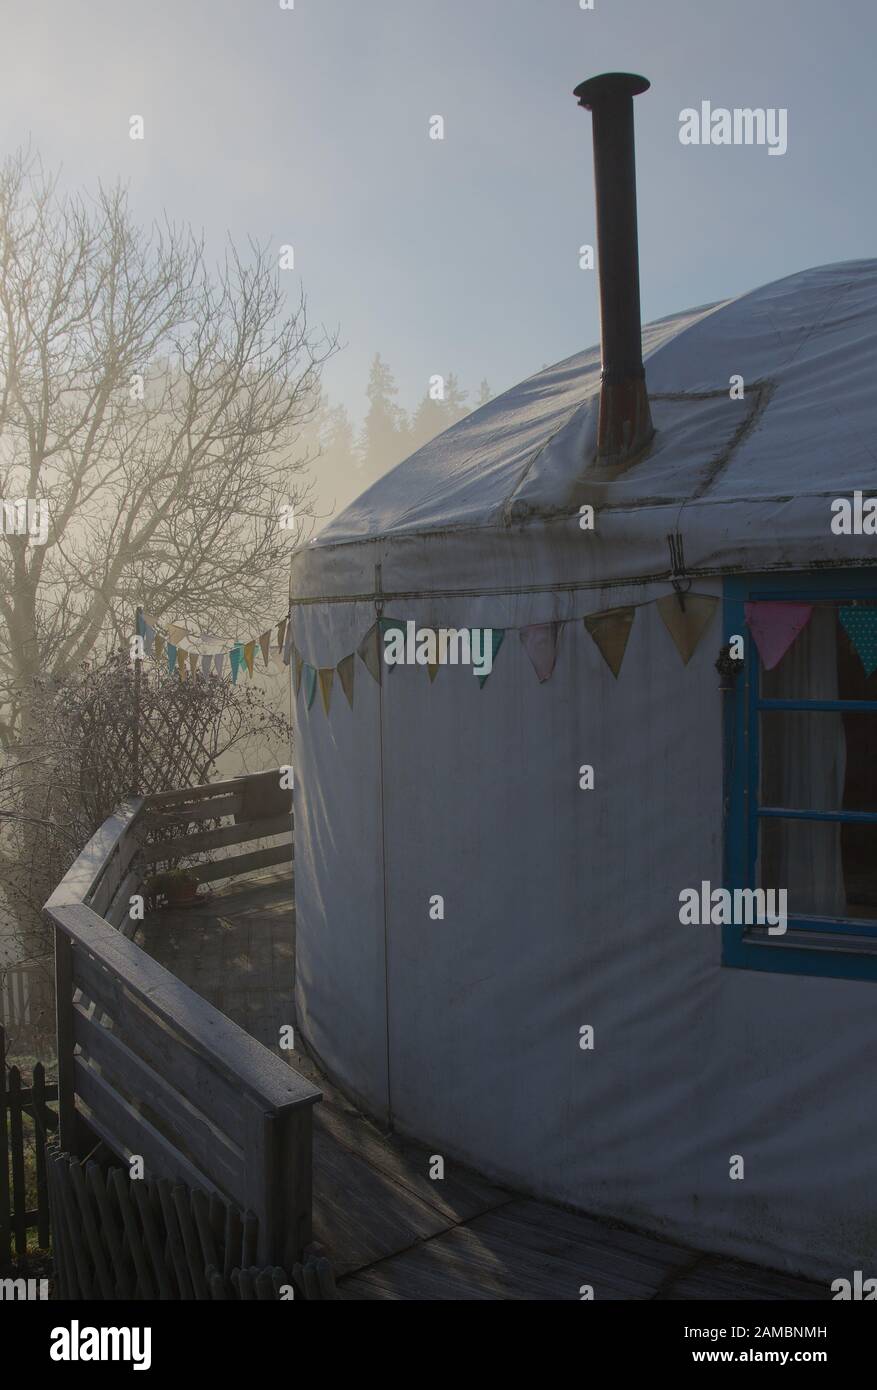 Tiny house in Yurt style for alternative living with a terrace view Stock Photo